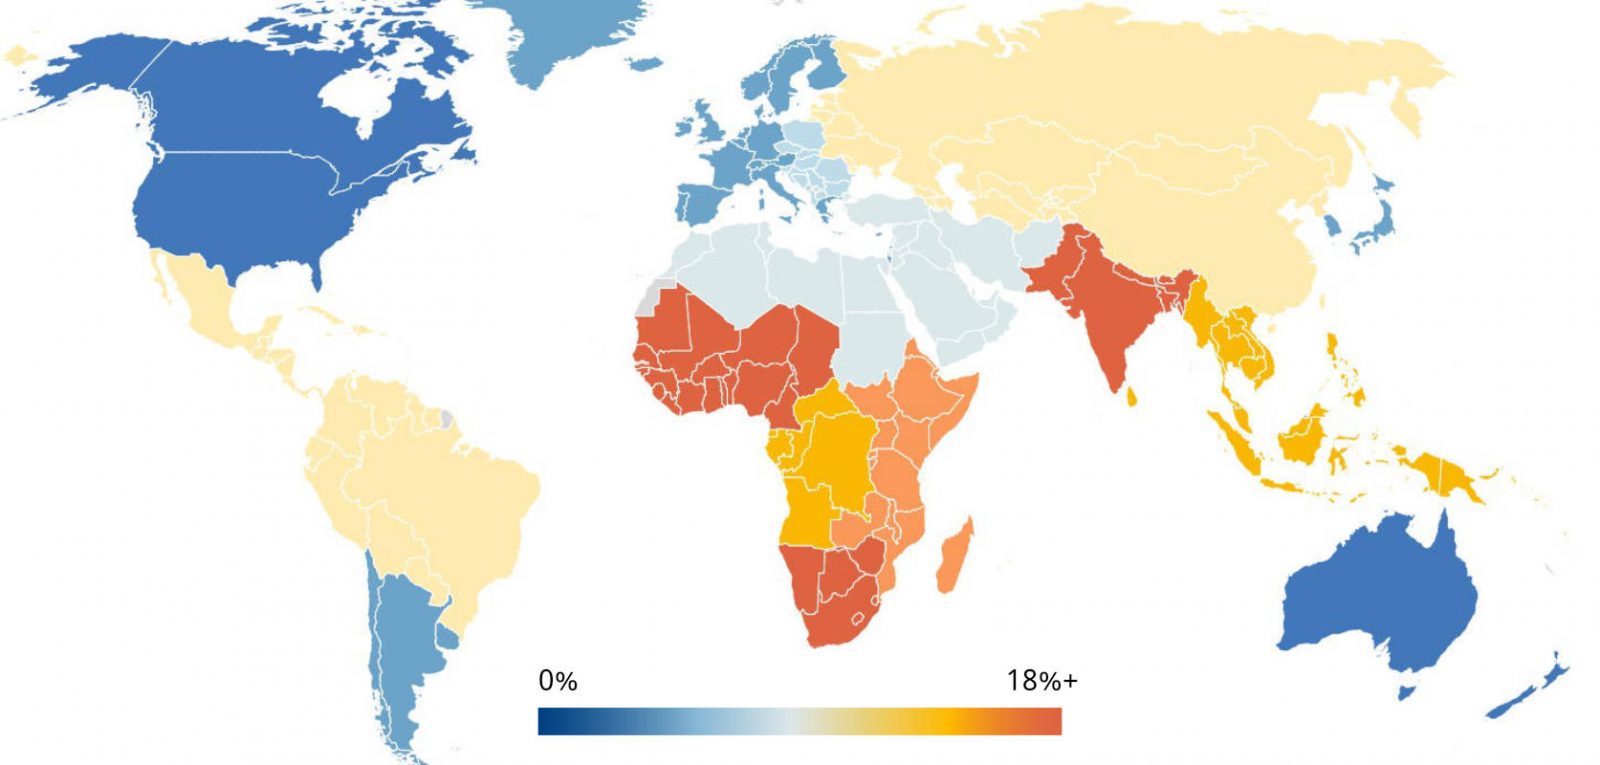 Map of world showing rates of vision loss, high in Africa and South Asia